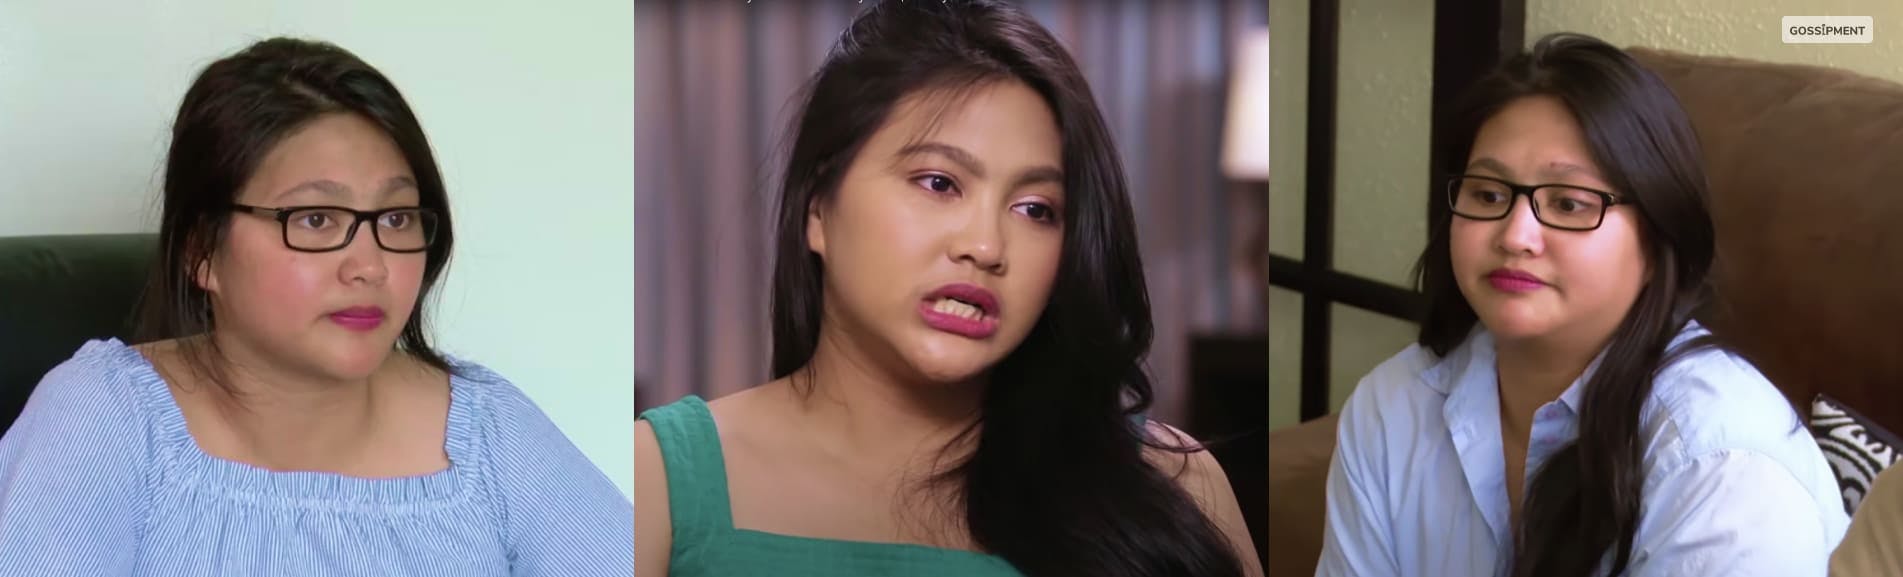 Cover Image for Leida Margaretha, The “90 Day Fiance” Star, Was Arrested This Friday In Wisconsin